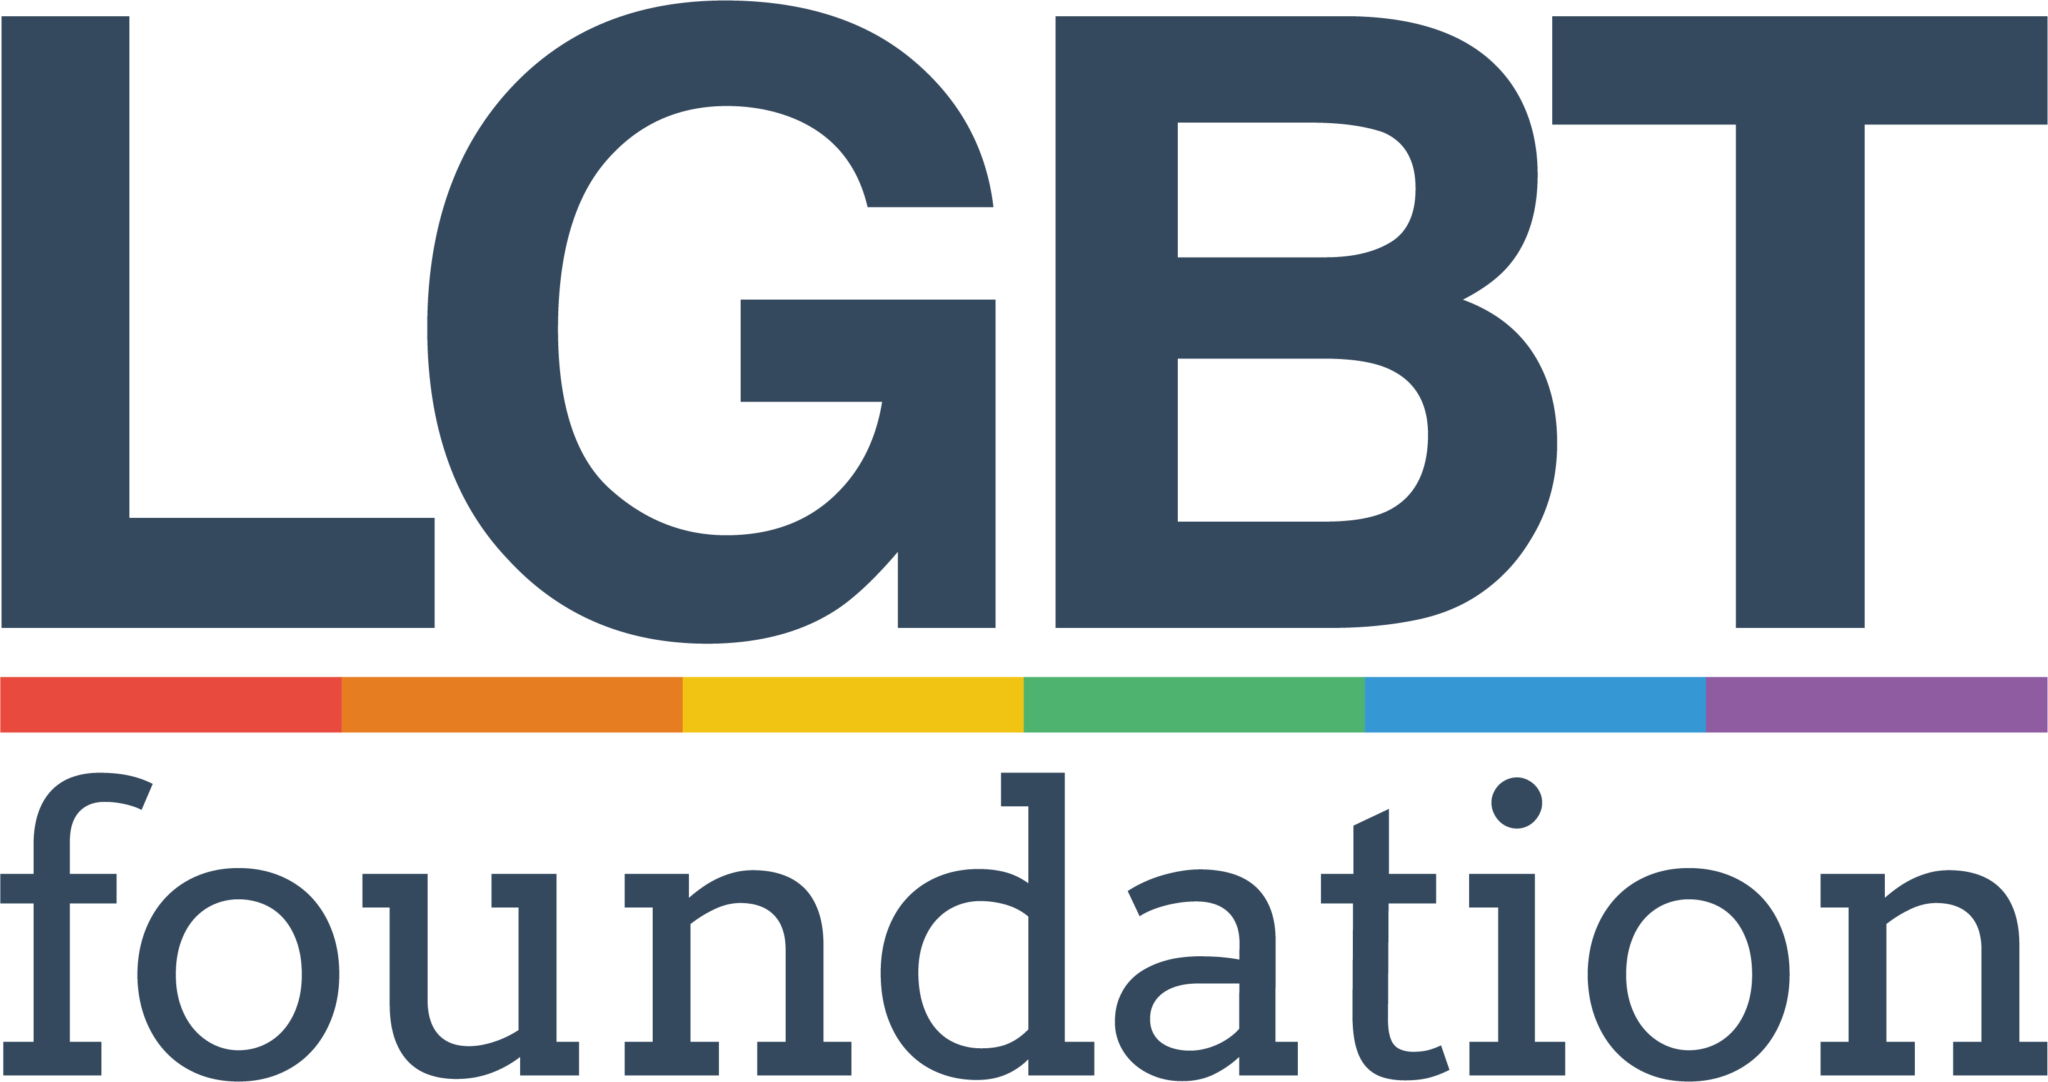 LGBT Foundation has been nominated for the Community Group of the year at the PinkNews Award 2020